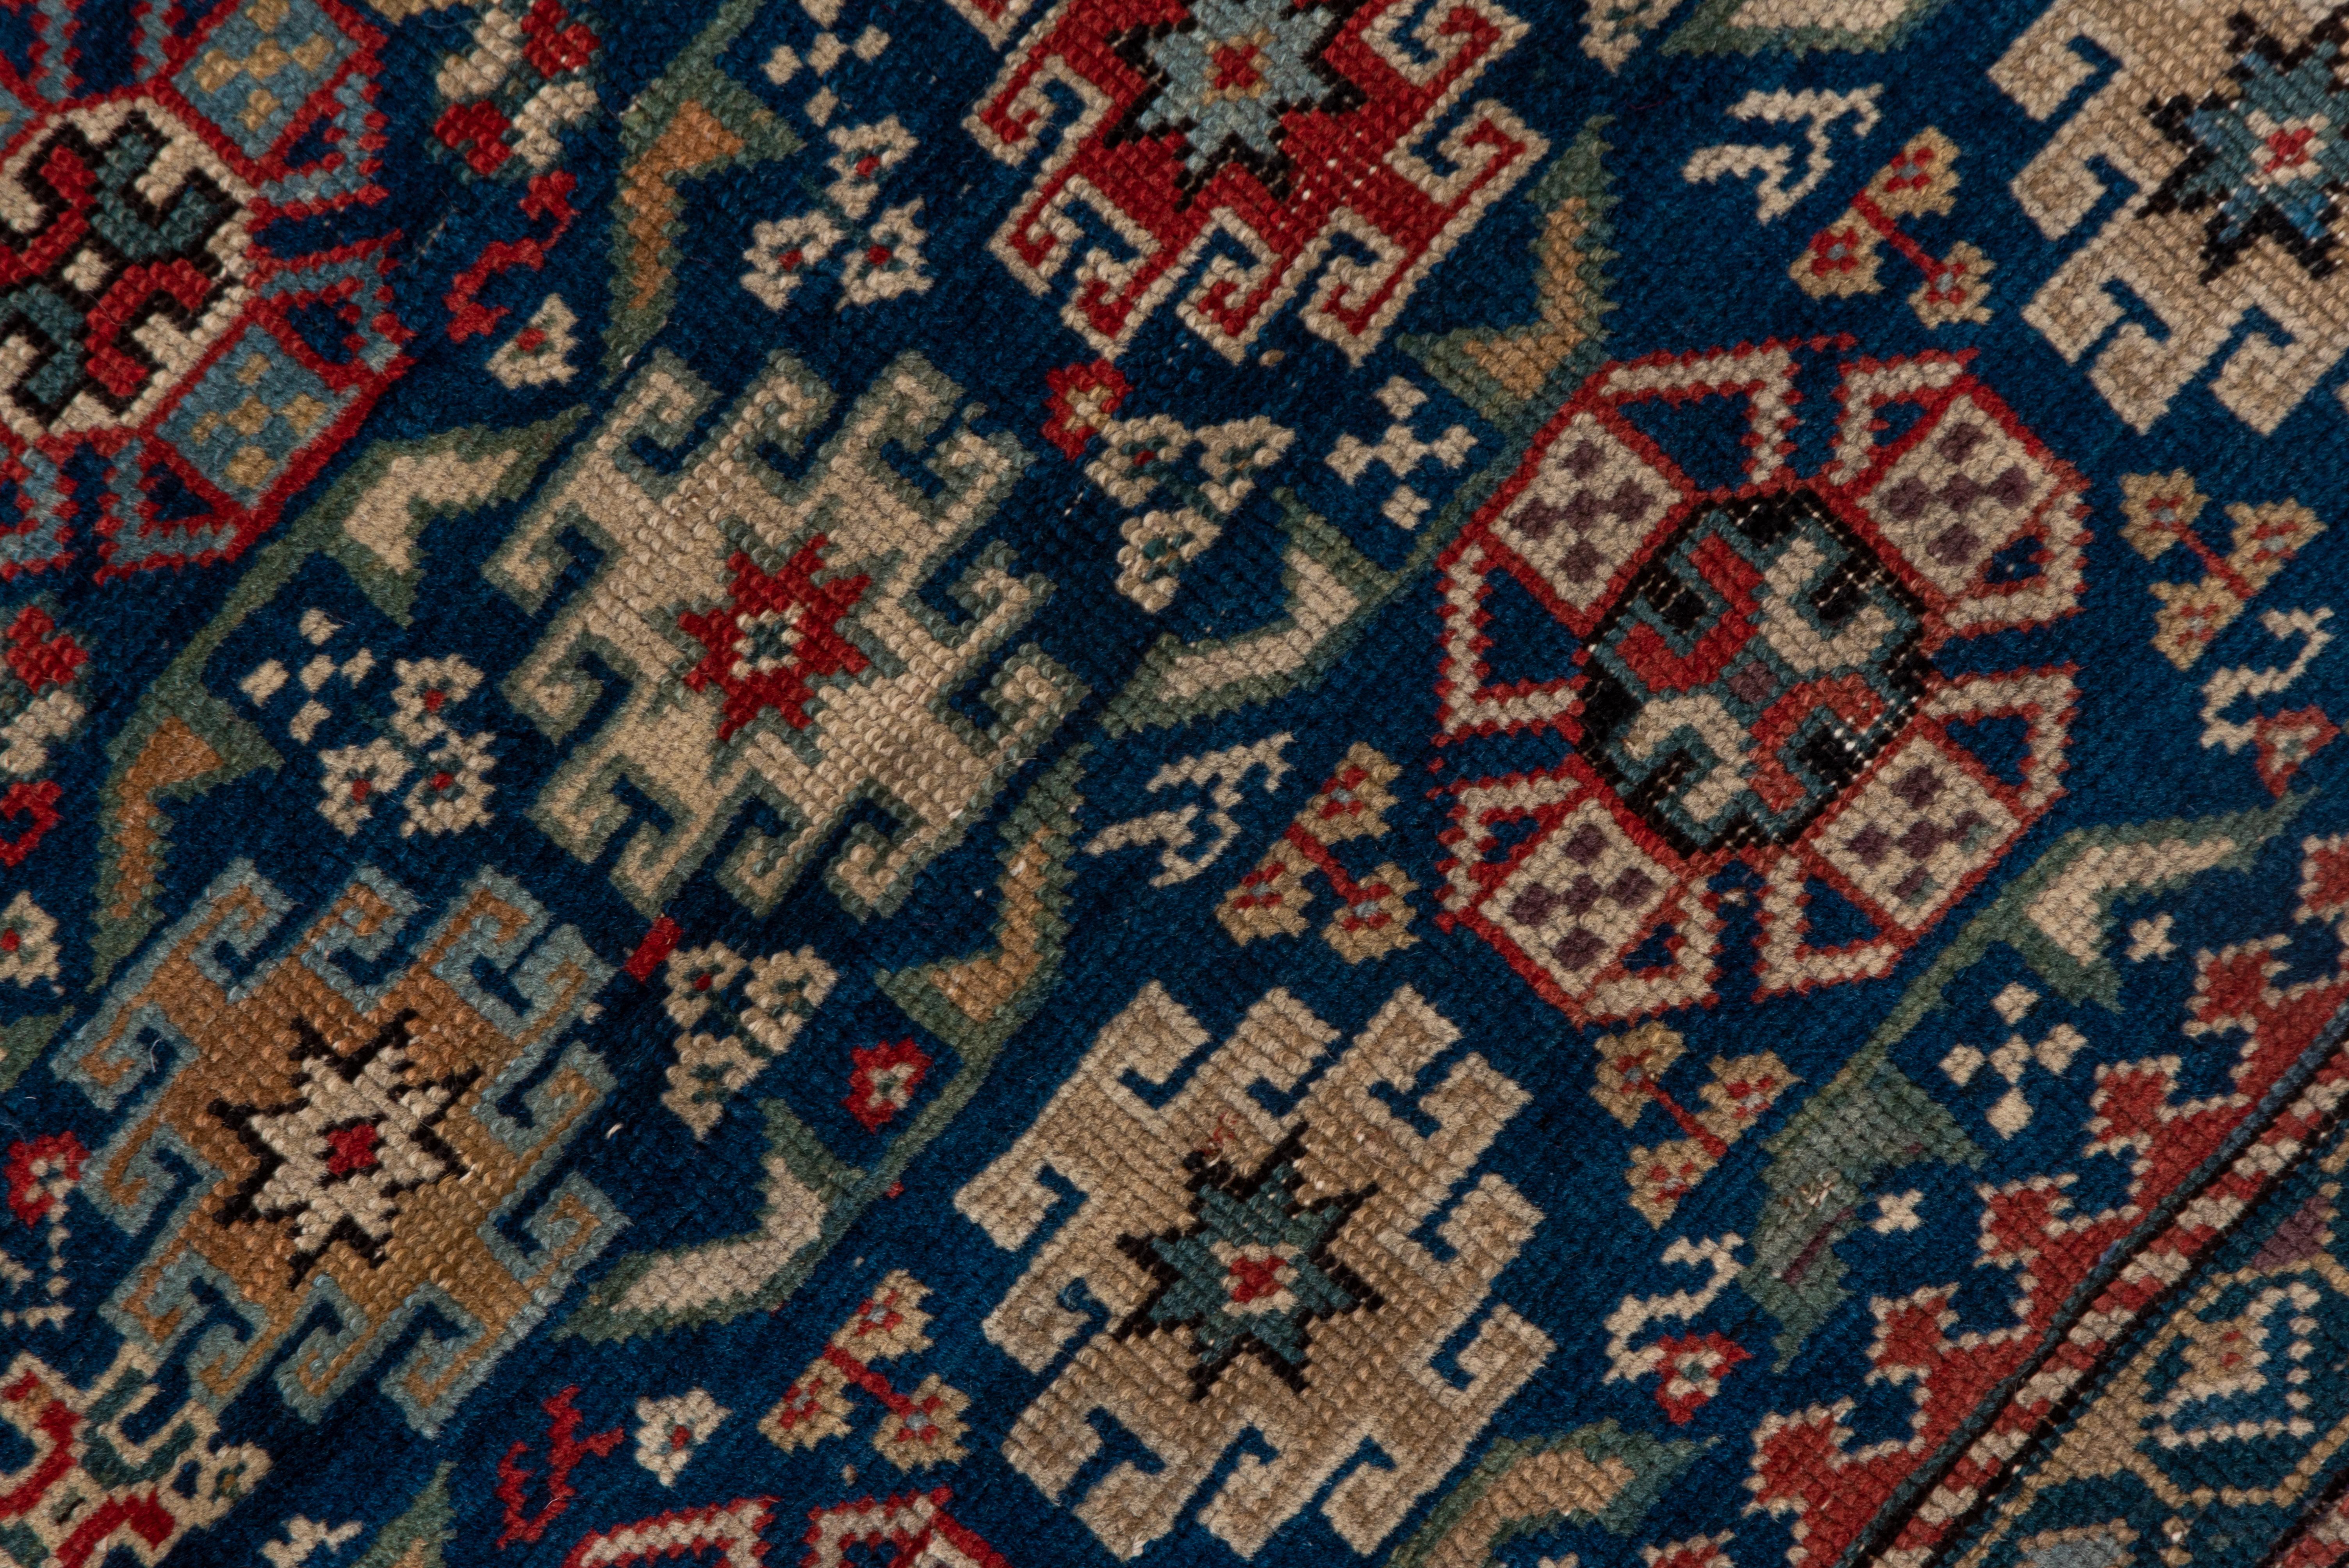 This good condition eastern Caucasian scatter features the characteristic Chichi design of small side-hooked medallions and Maltese crosses on an abrashed royal blue ground, with a classic rosette and diagonal bar main border on a brown-black